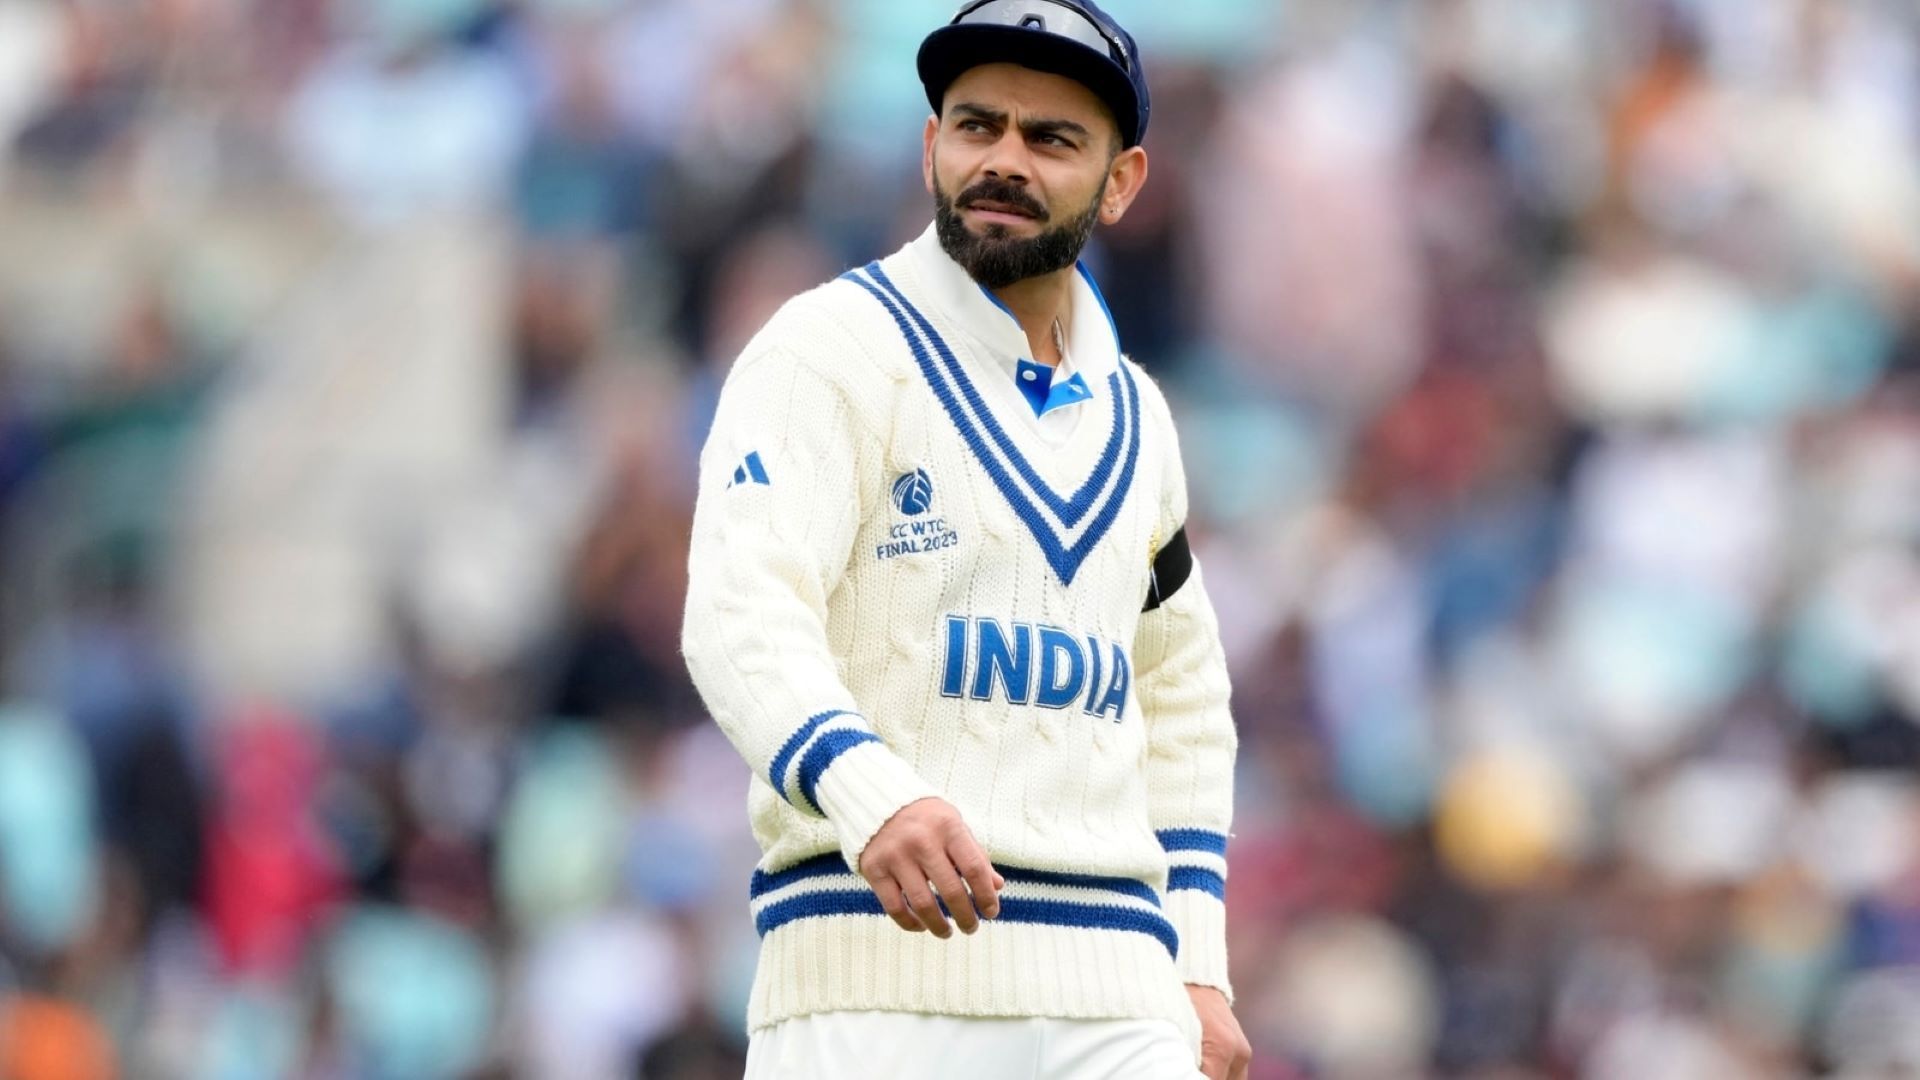 Virat kohli was his usual animated self on a tough day 1 for India